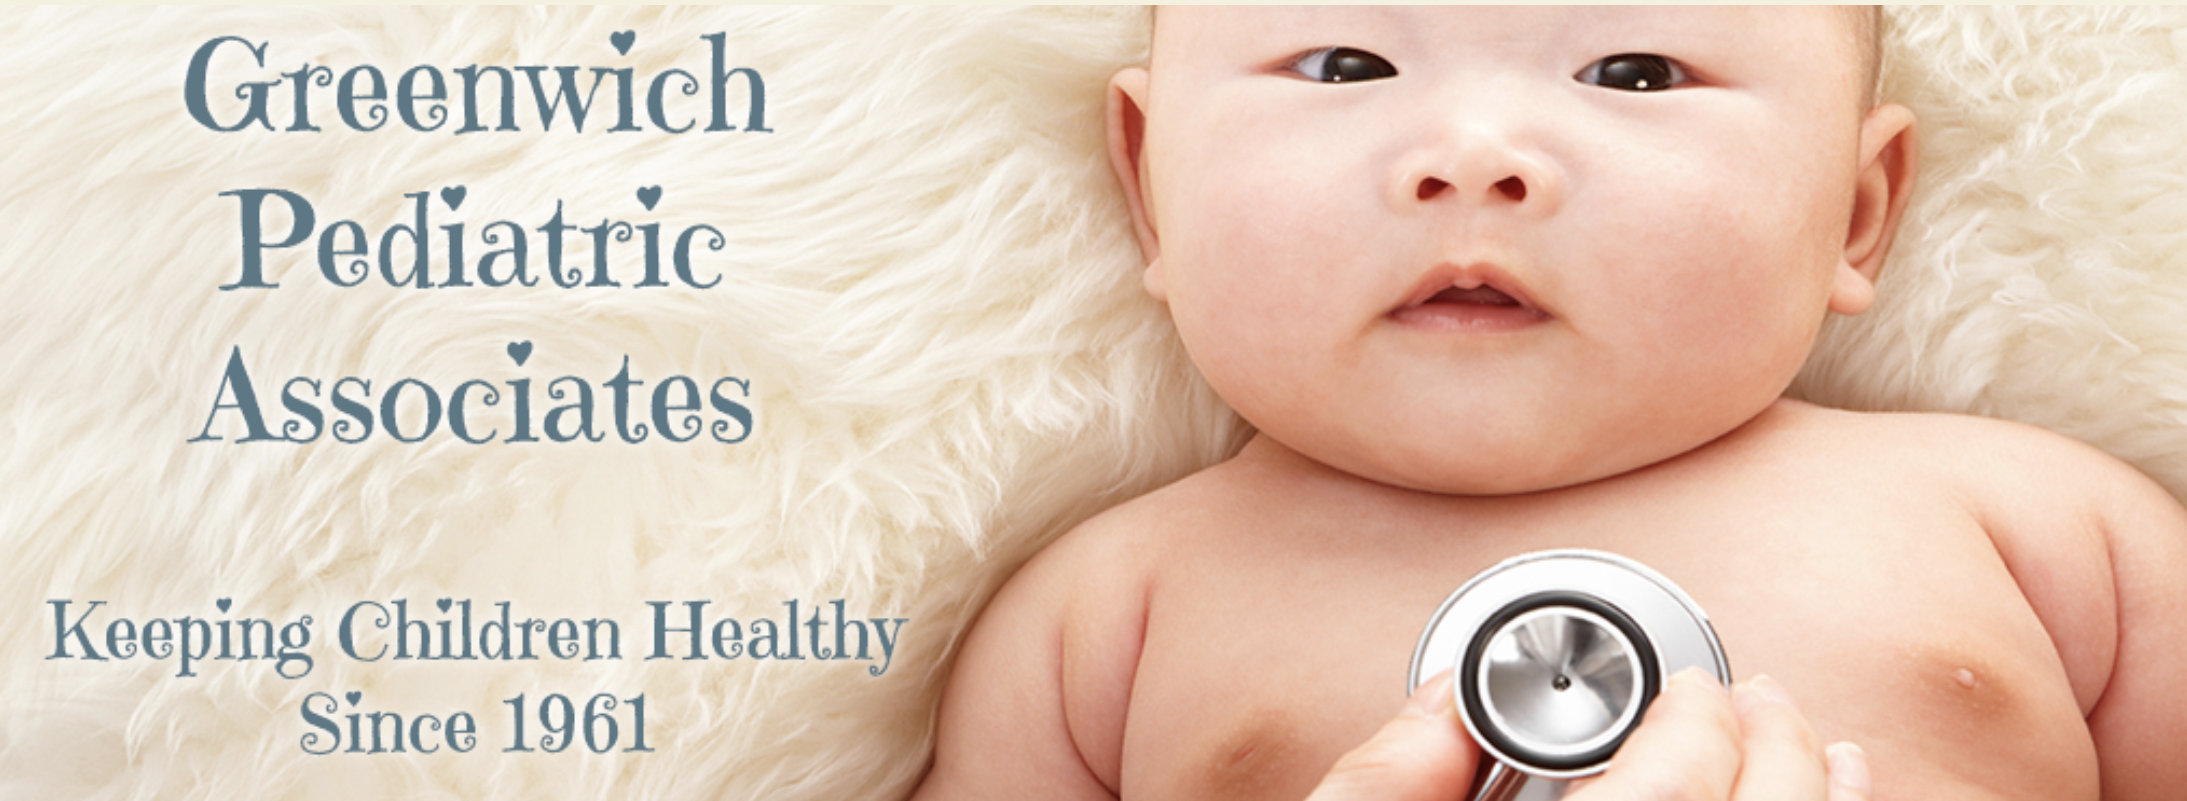 Greenwich Pediatrics Pushes The Vax On Babies, Despite Evidence Of Serious Side Effects, Does Not Prevent Transmission